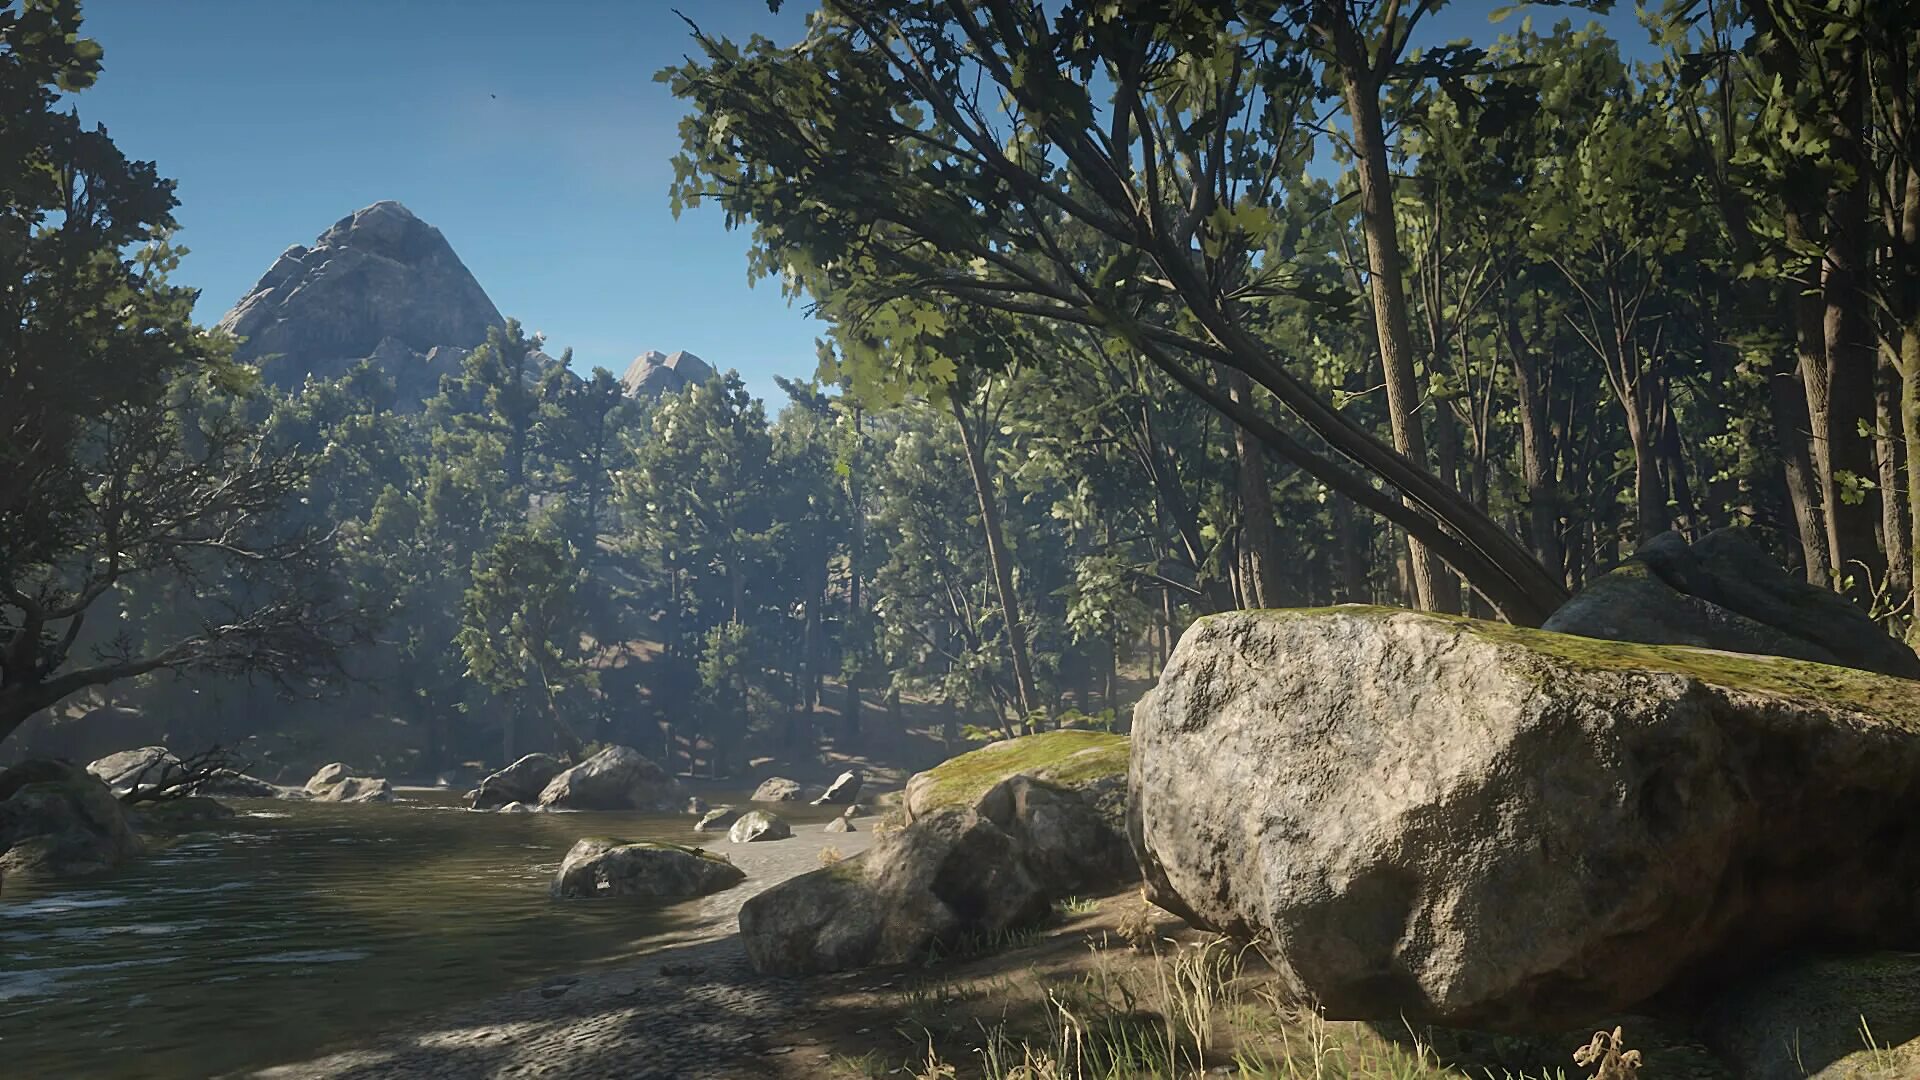 Red dead redemption 2 природа. Rdr2 nature. Пейзажи РДР 2 горы. Rdr2 view of nature.